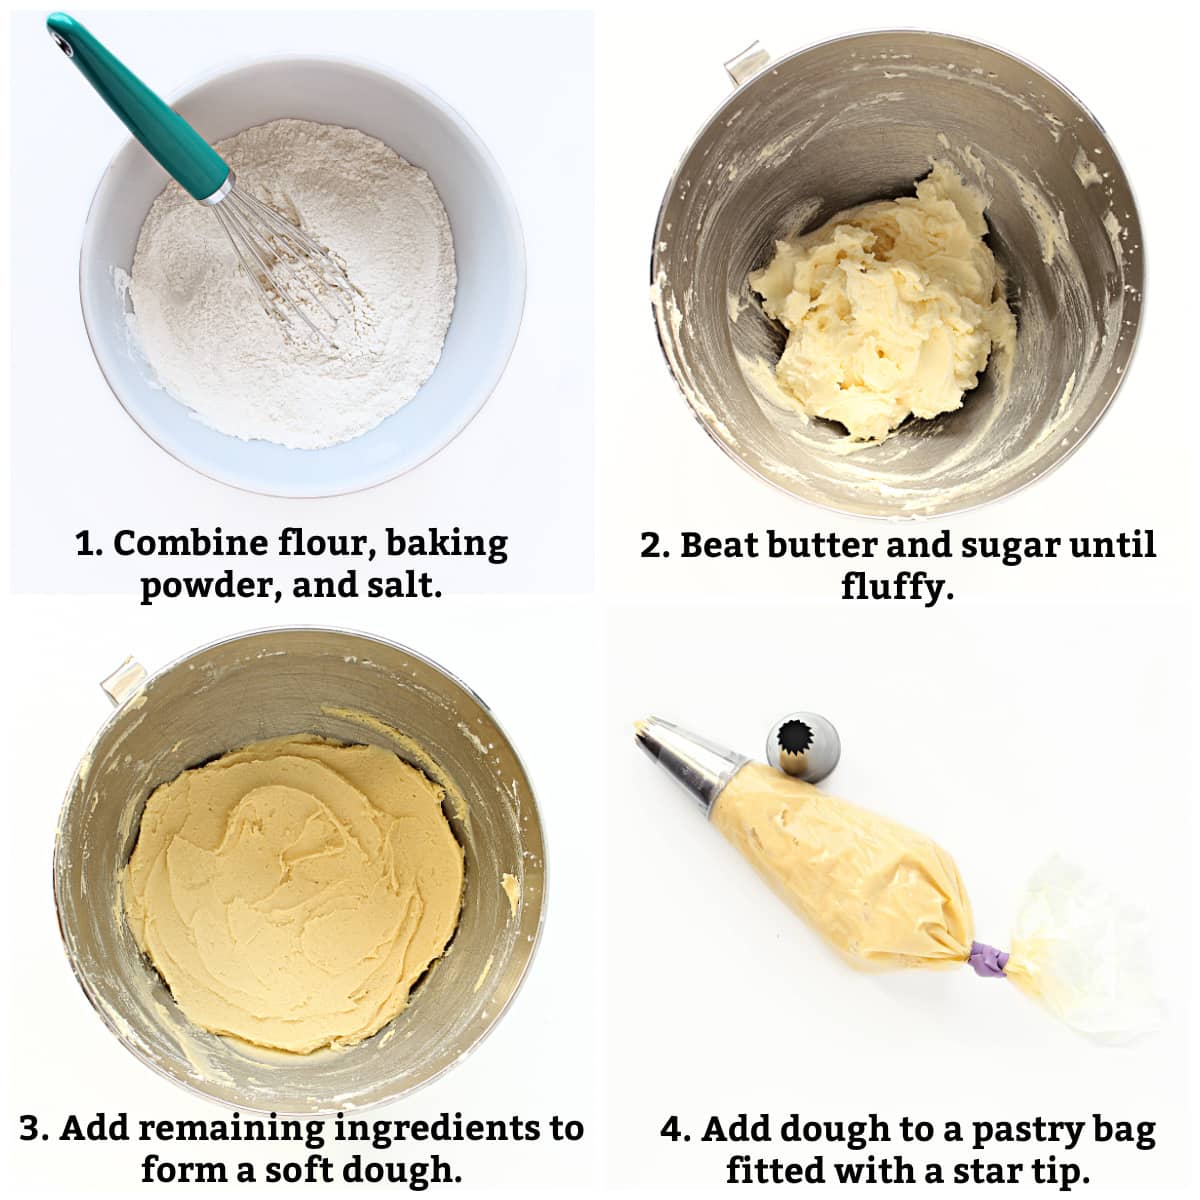 Instructions collage labeled; combine dry ingredients, beat butter and sugar, combine all ingredients, dough into  bag.